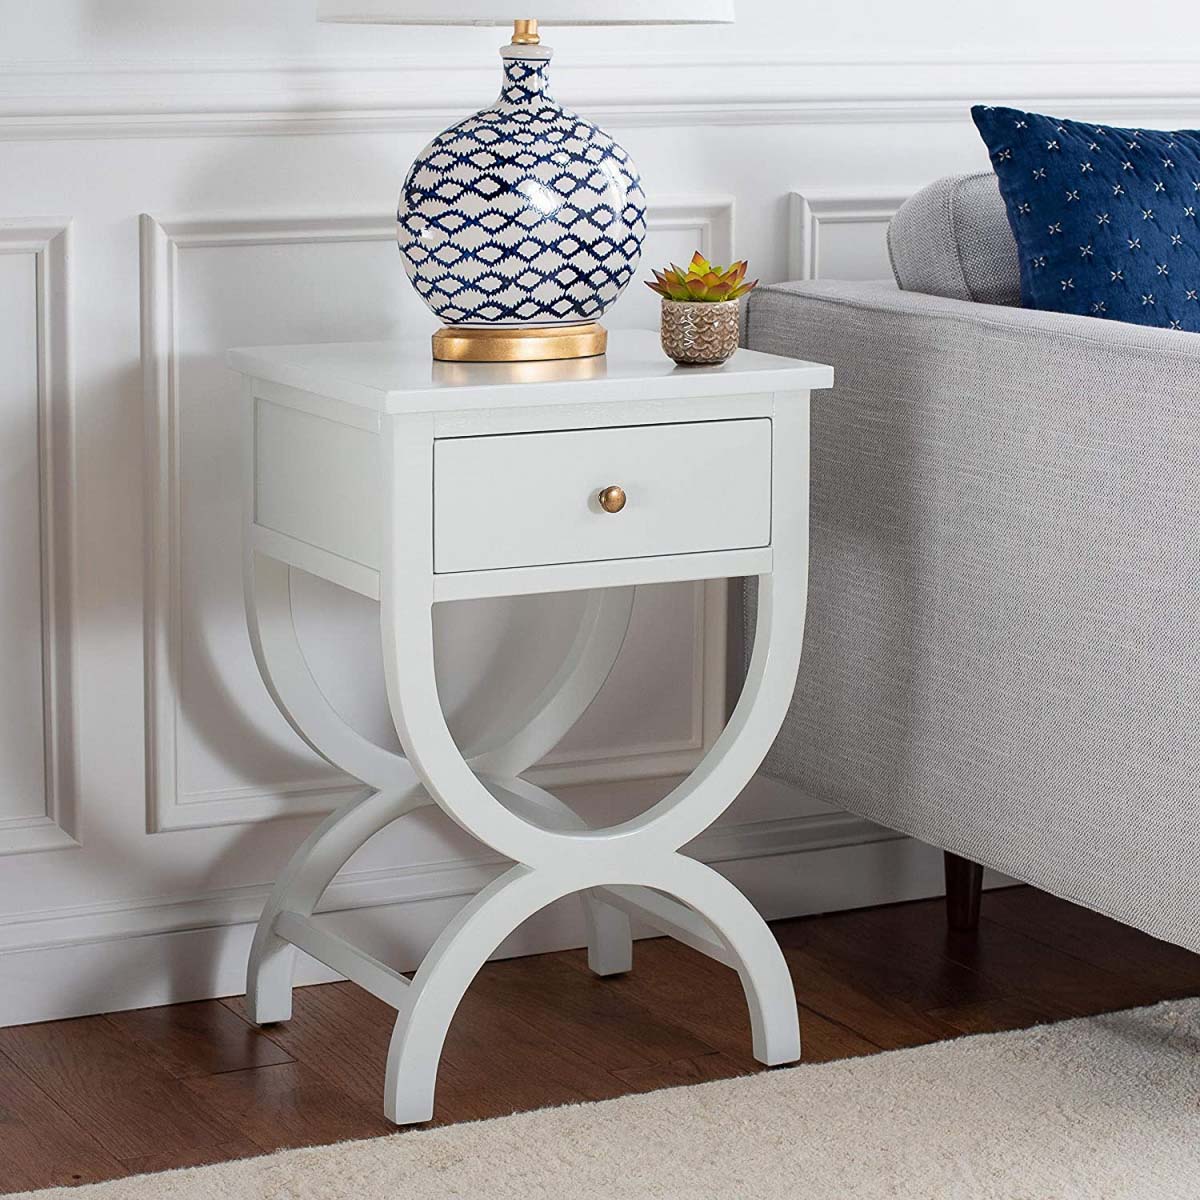 The perfect narrow nightstand with beautiful curved legs!